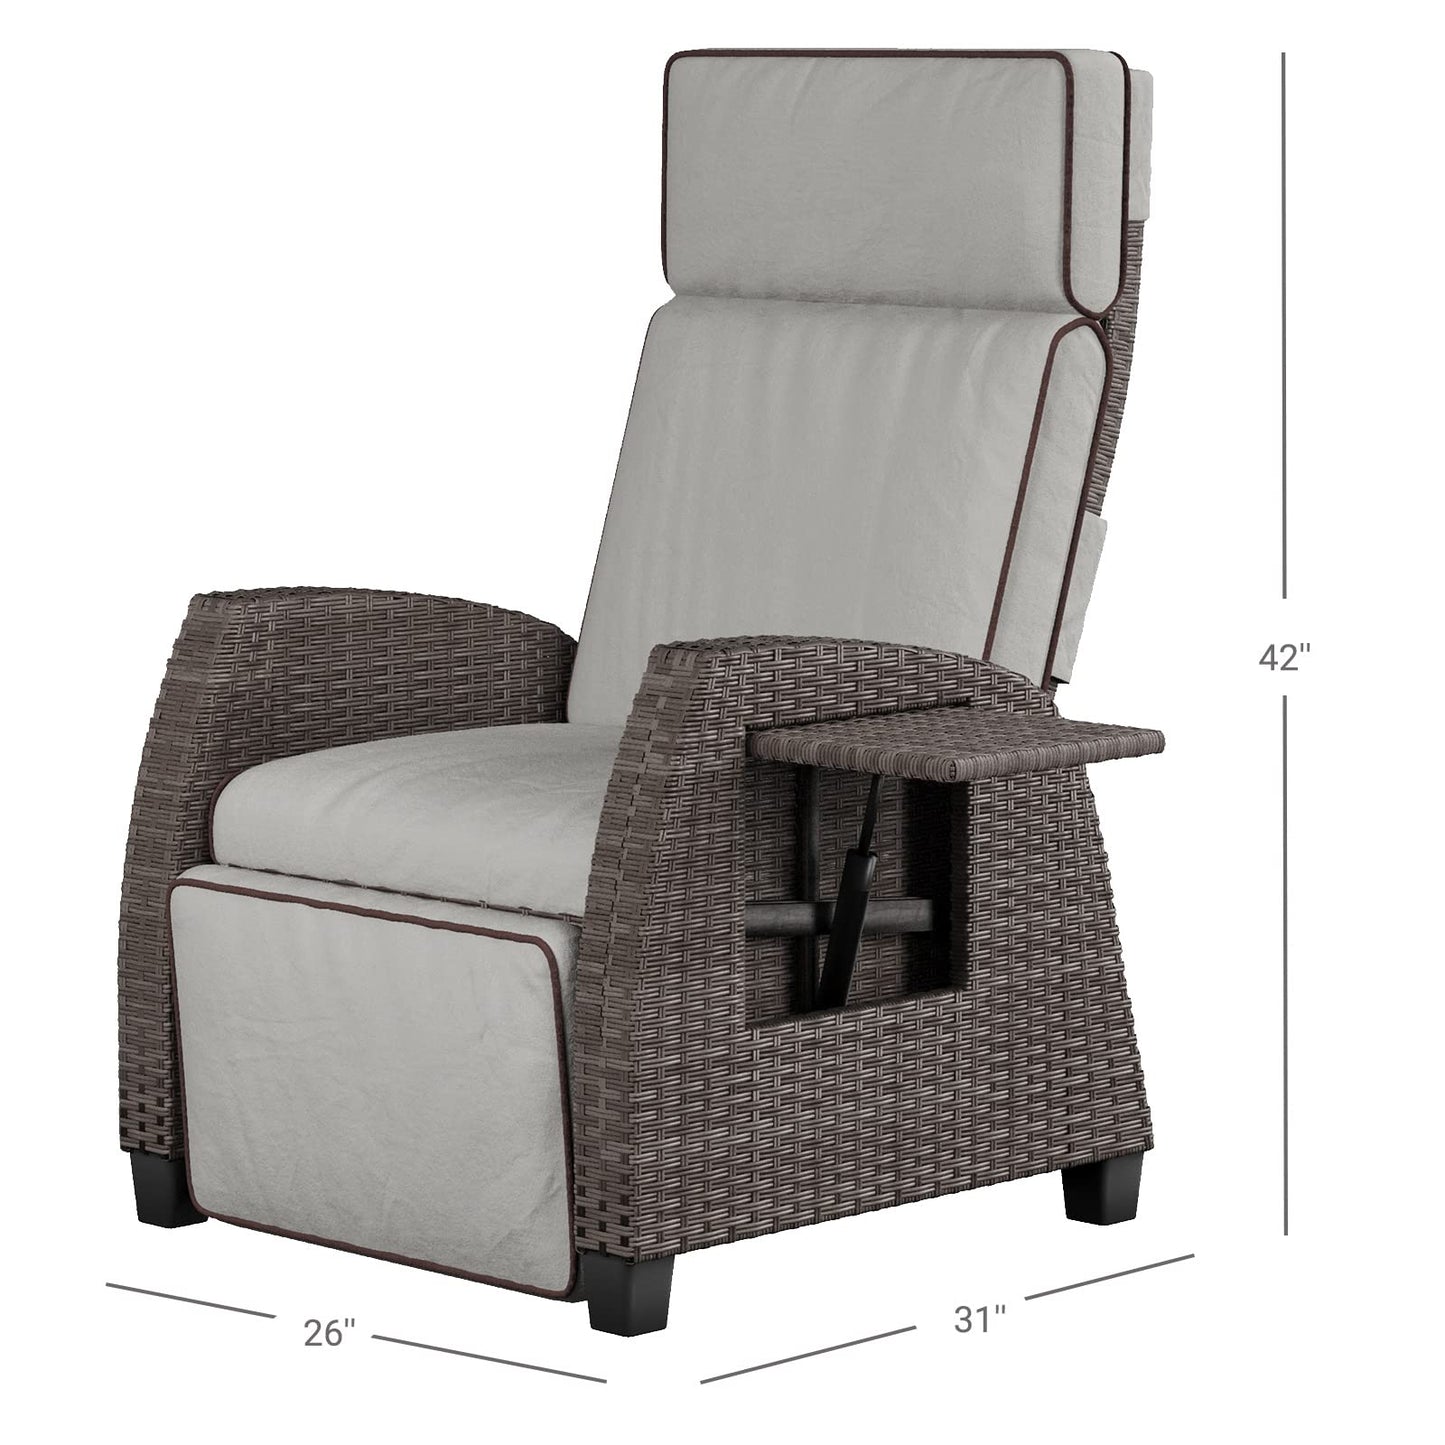 Grand patio Indoor & Outdoor Moor Recliner PE Wicker with Flip Table Push Back Reclining Lounge Chair, Griege 1 PCS